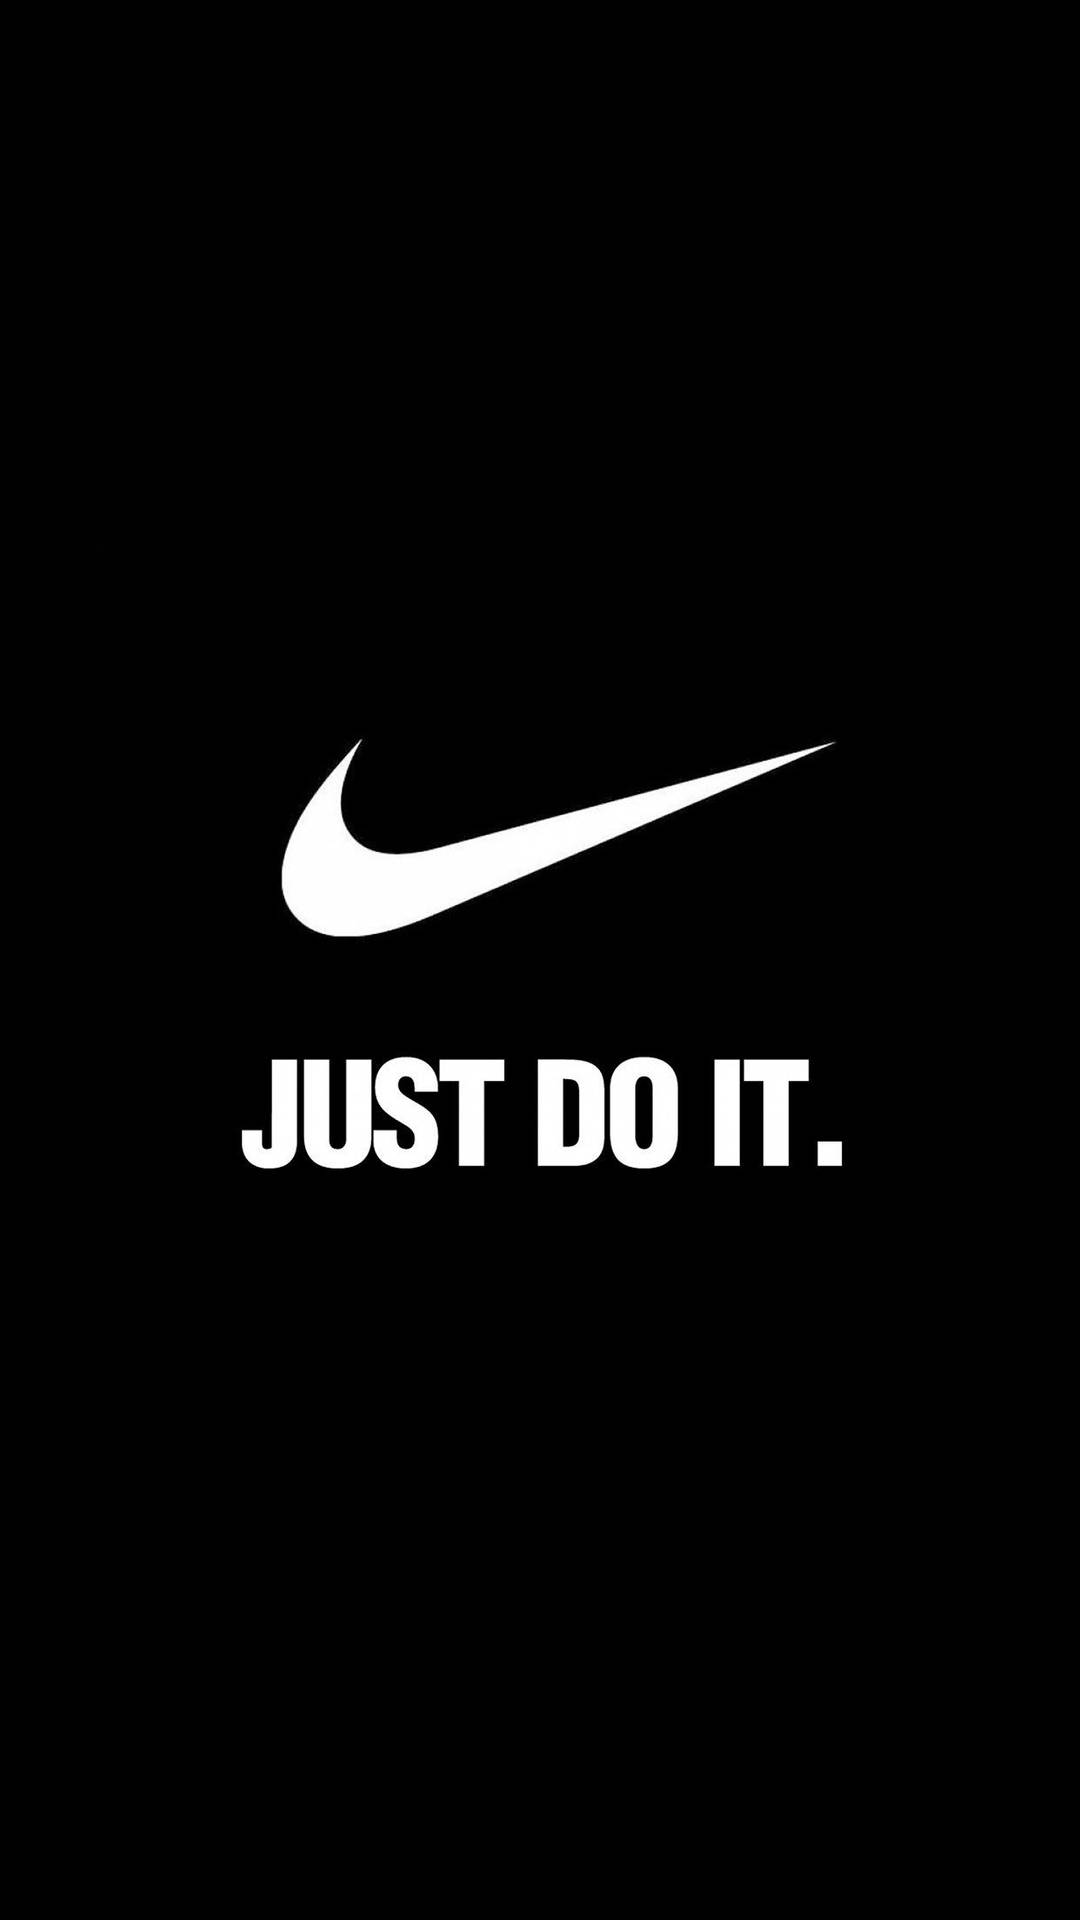 Nike 1242X2208 Wallpaper and Background Image